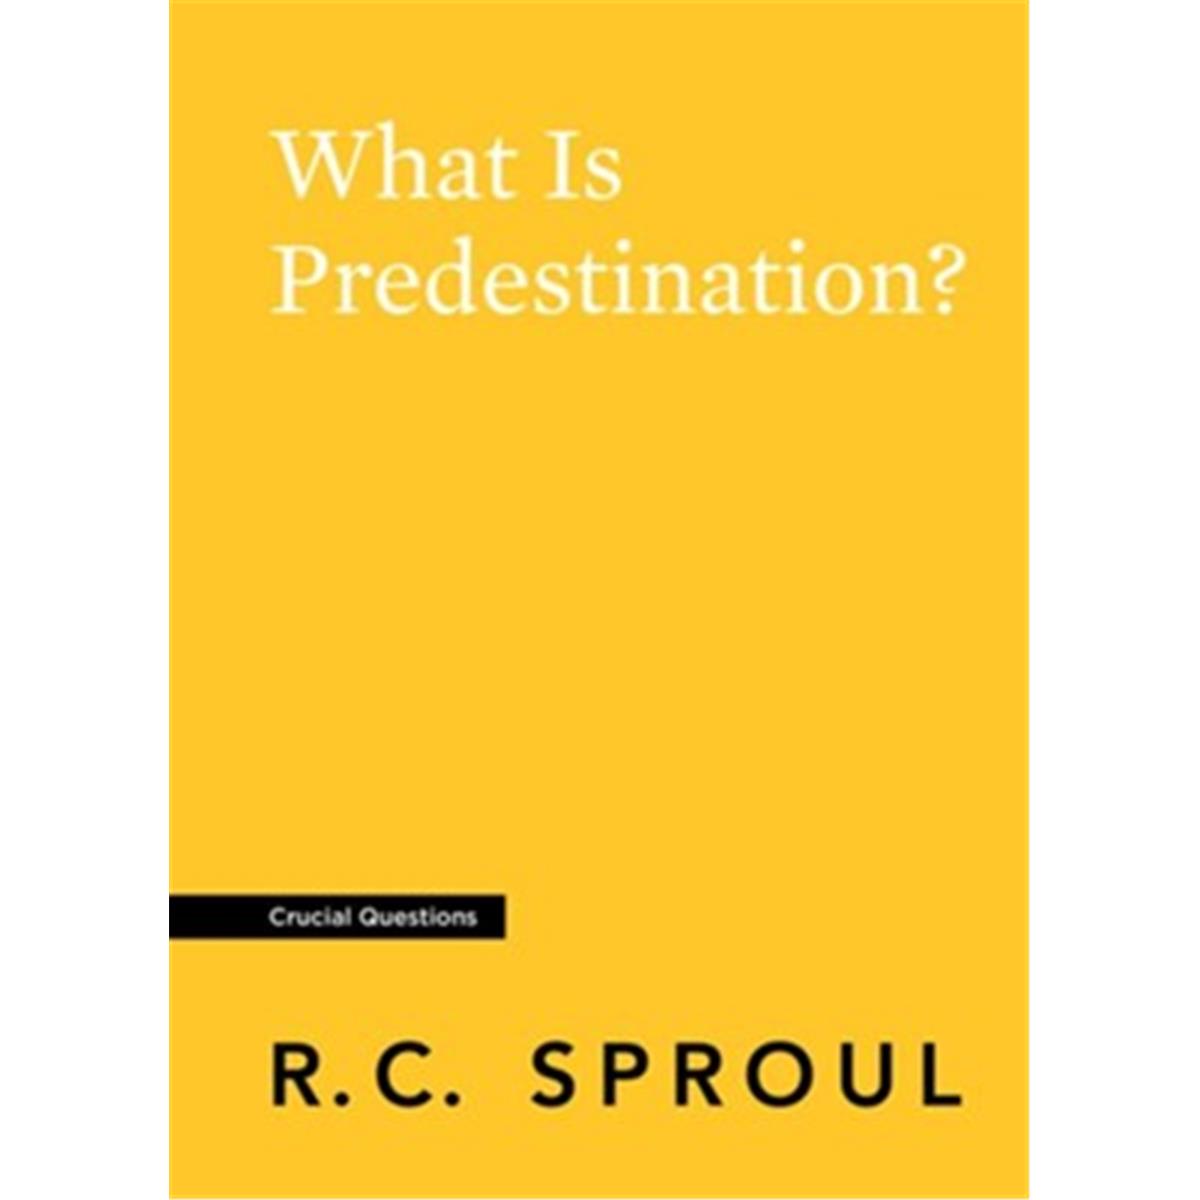 149788 What Is Predestination - Crucial Questions - Redesign - Nov